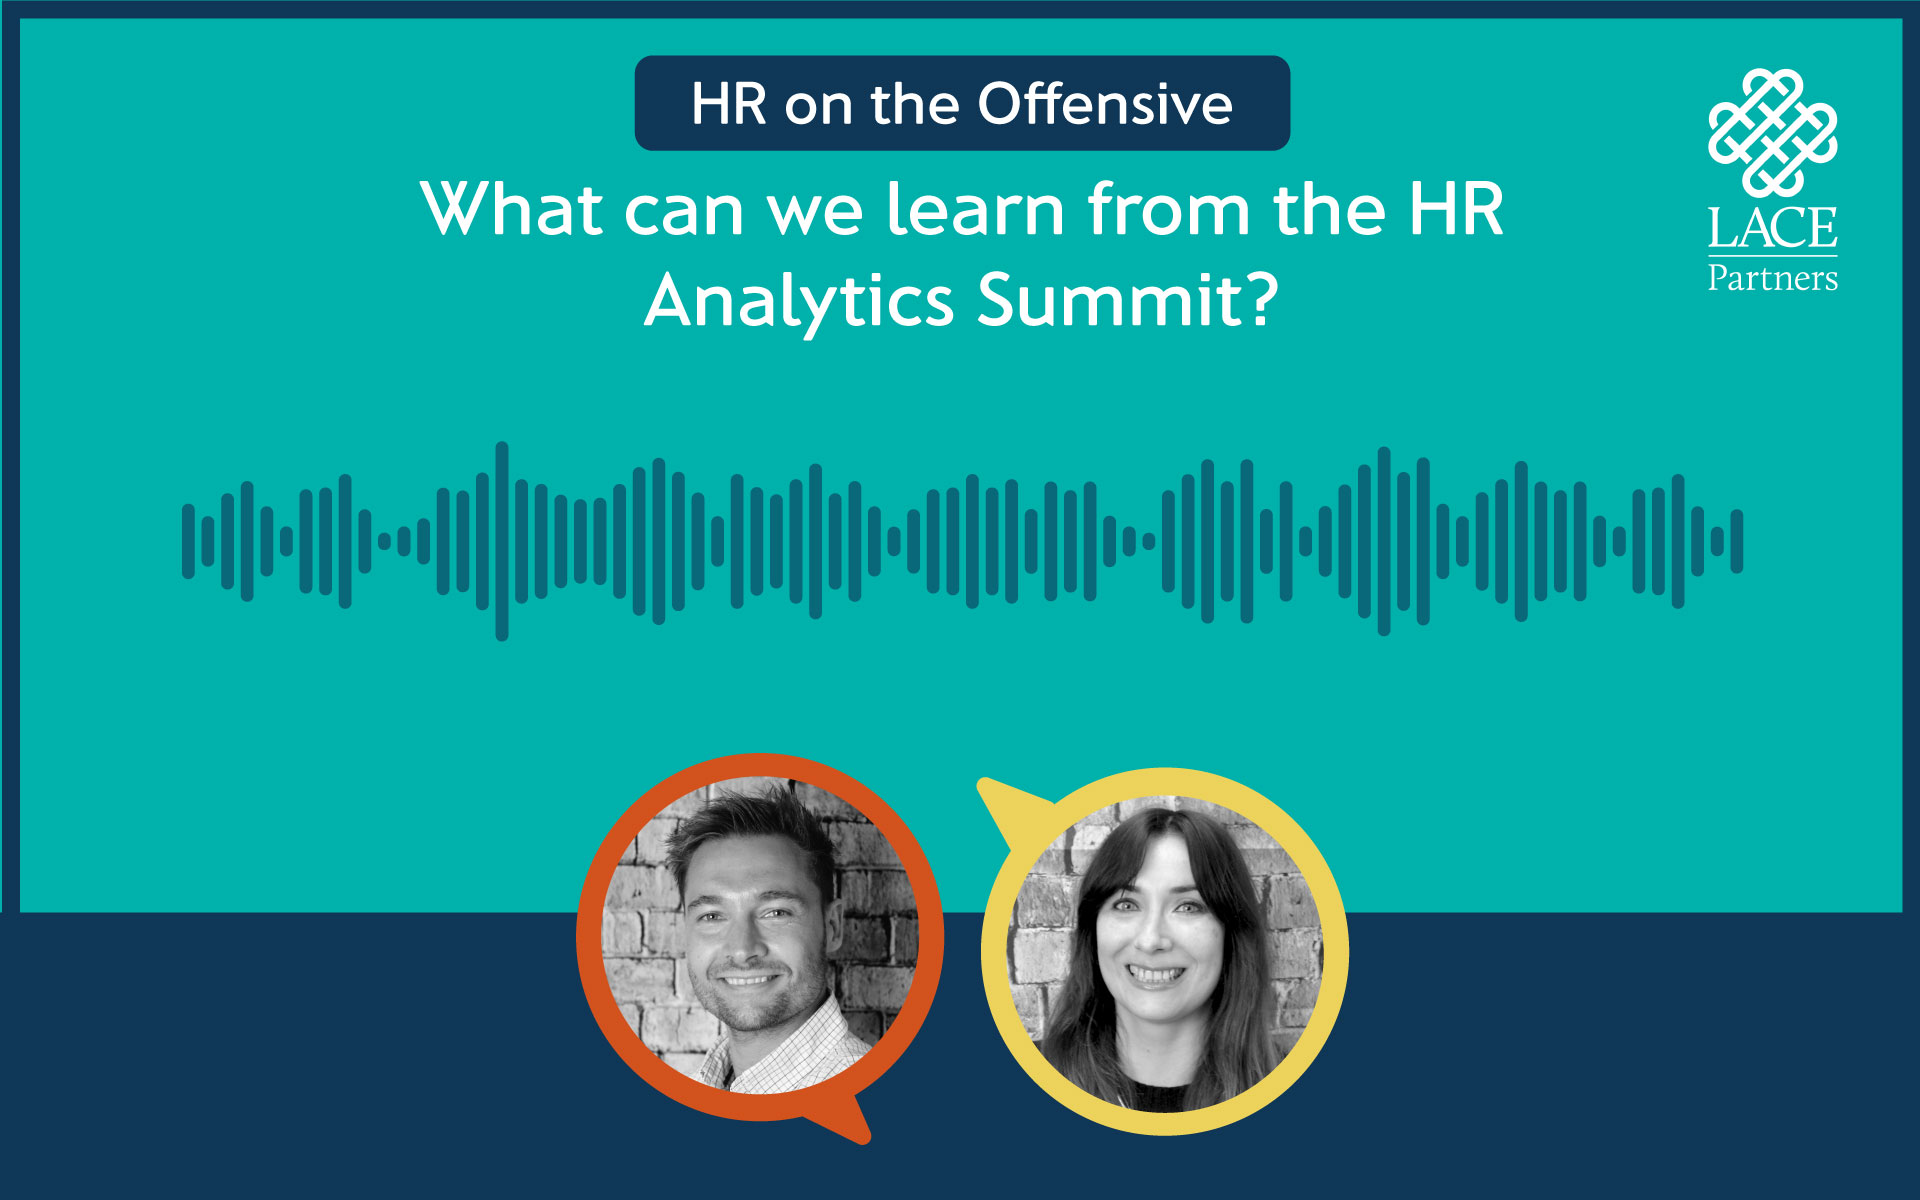 What can we learn from the HR Analytics Summit?